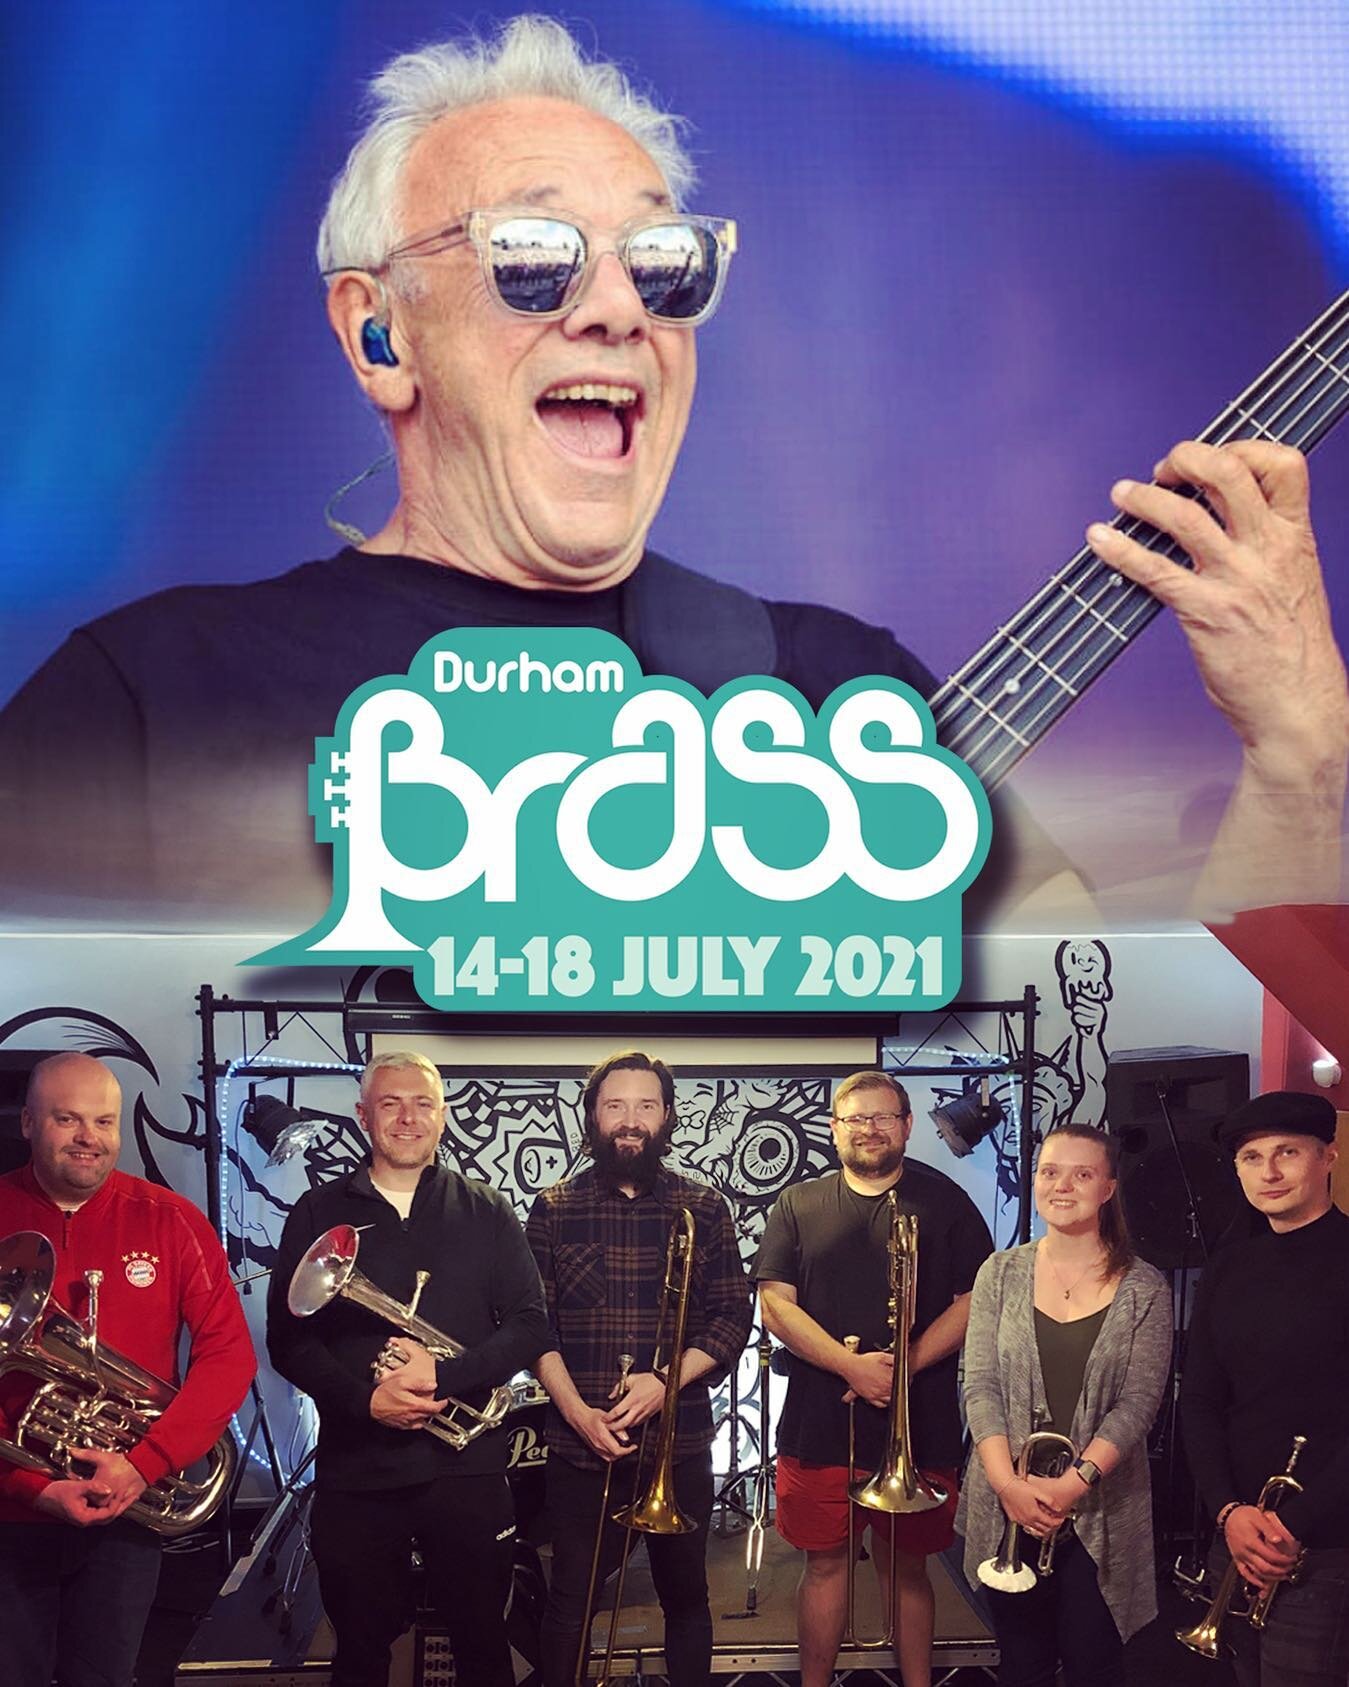 #repost @dennis_band . . .

DENNIS are playing in the @trevorhornmusic band @durhambrass festival 2021 🤩

The @dennis_band brass musicians from #houghtonbrass &amp; @durham_minersbrassband will be performing alongside Trevor Horn and his band as the